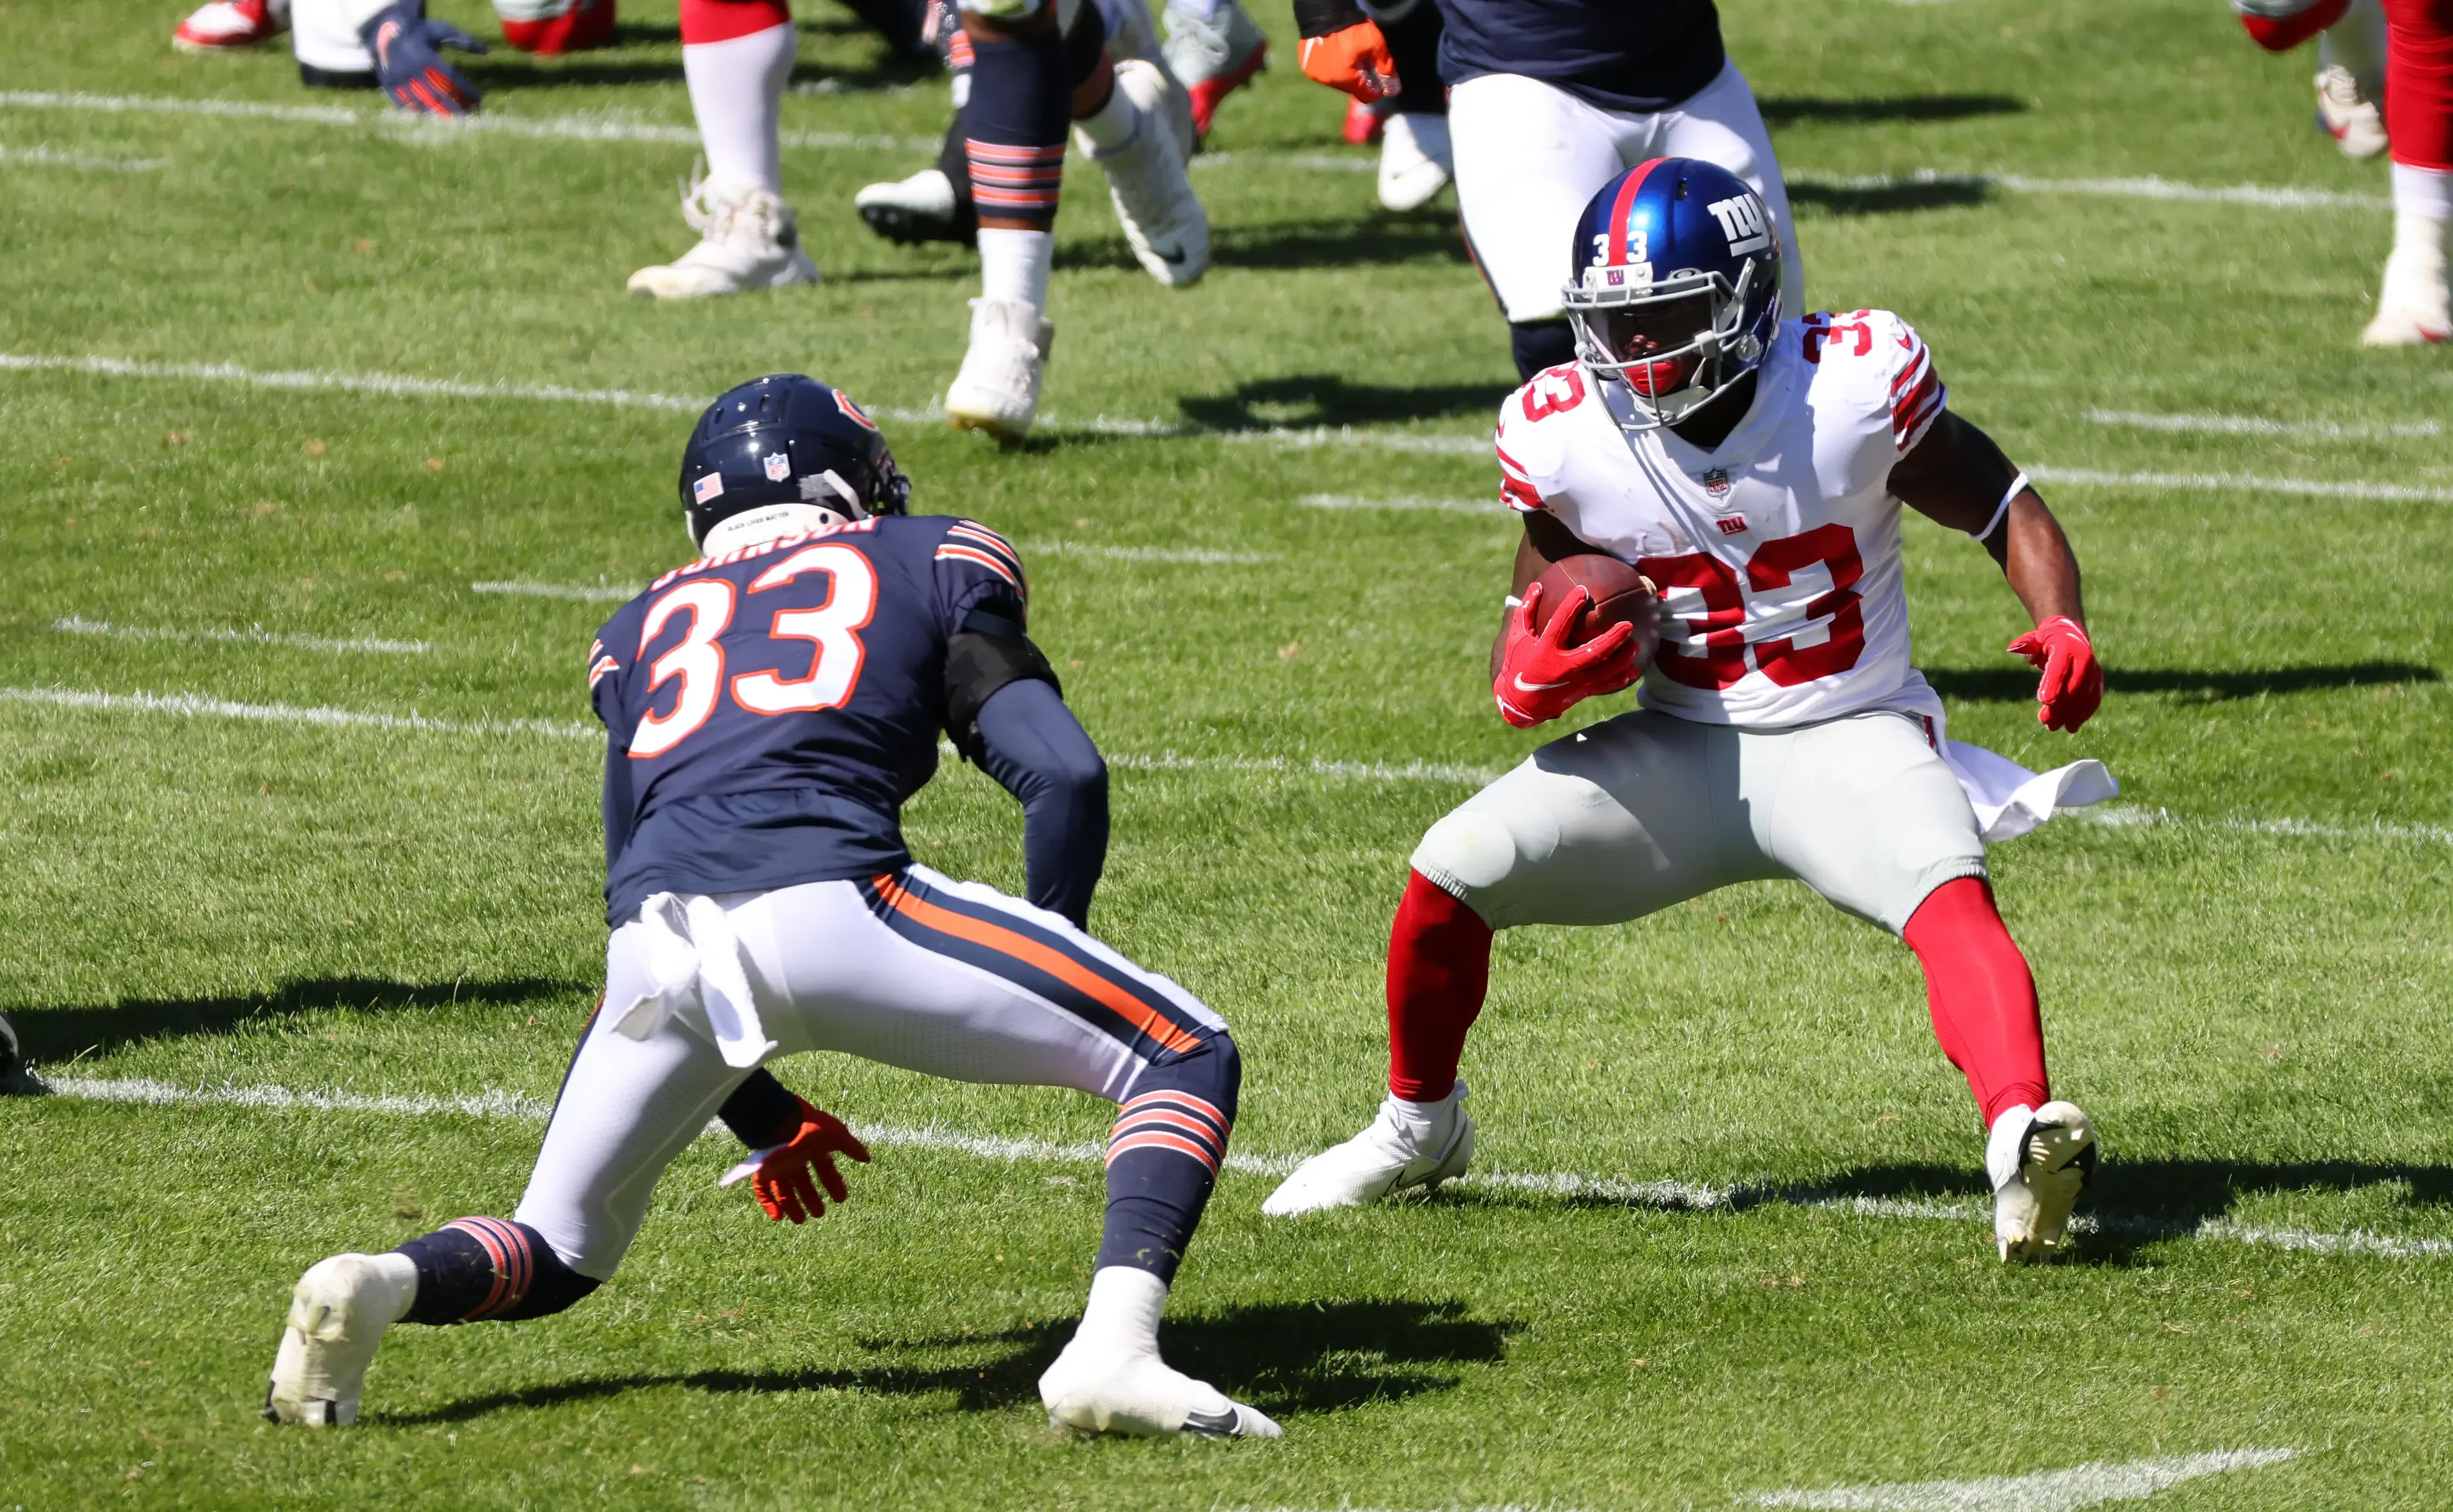 Sep 20, 2020; Chicago, Illinois, USA; New York Giants running back Dion Lewis (33) rushes the ball against Chicago Bears cornerback Jaylon Johnson (33) during the second quarter at Soldier Field. Mandatory Credit: Mike Dinovo-USA TODAY Sports / © Mike Dinovo-USA TODAY Sports